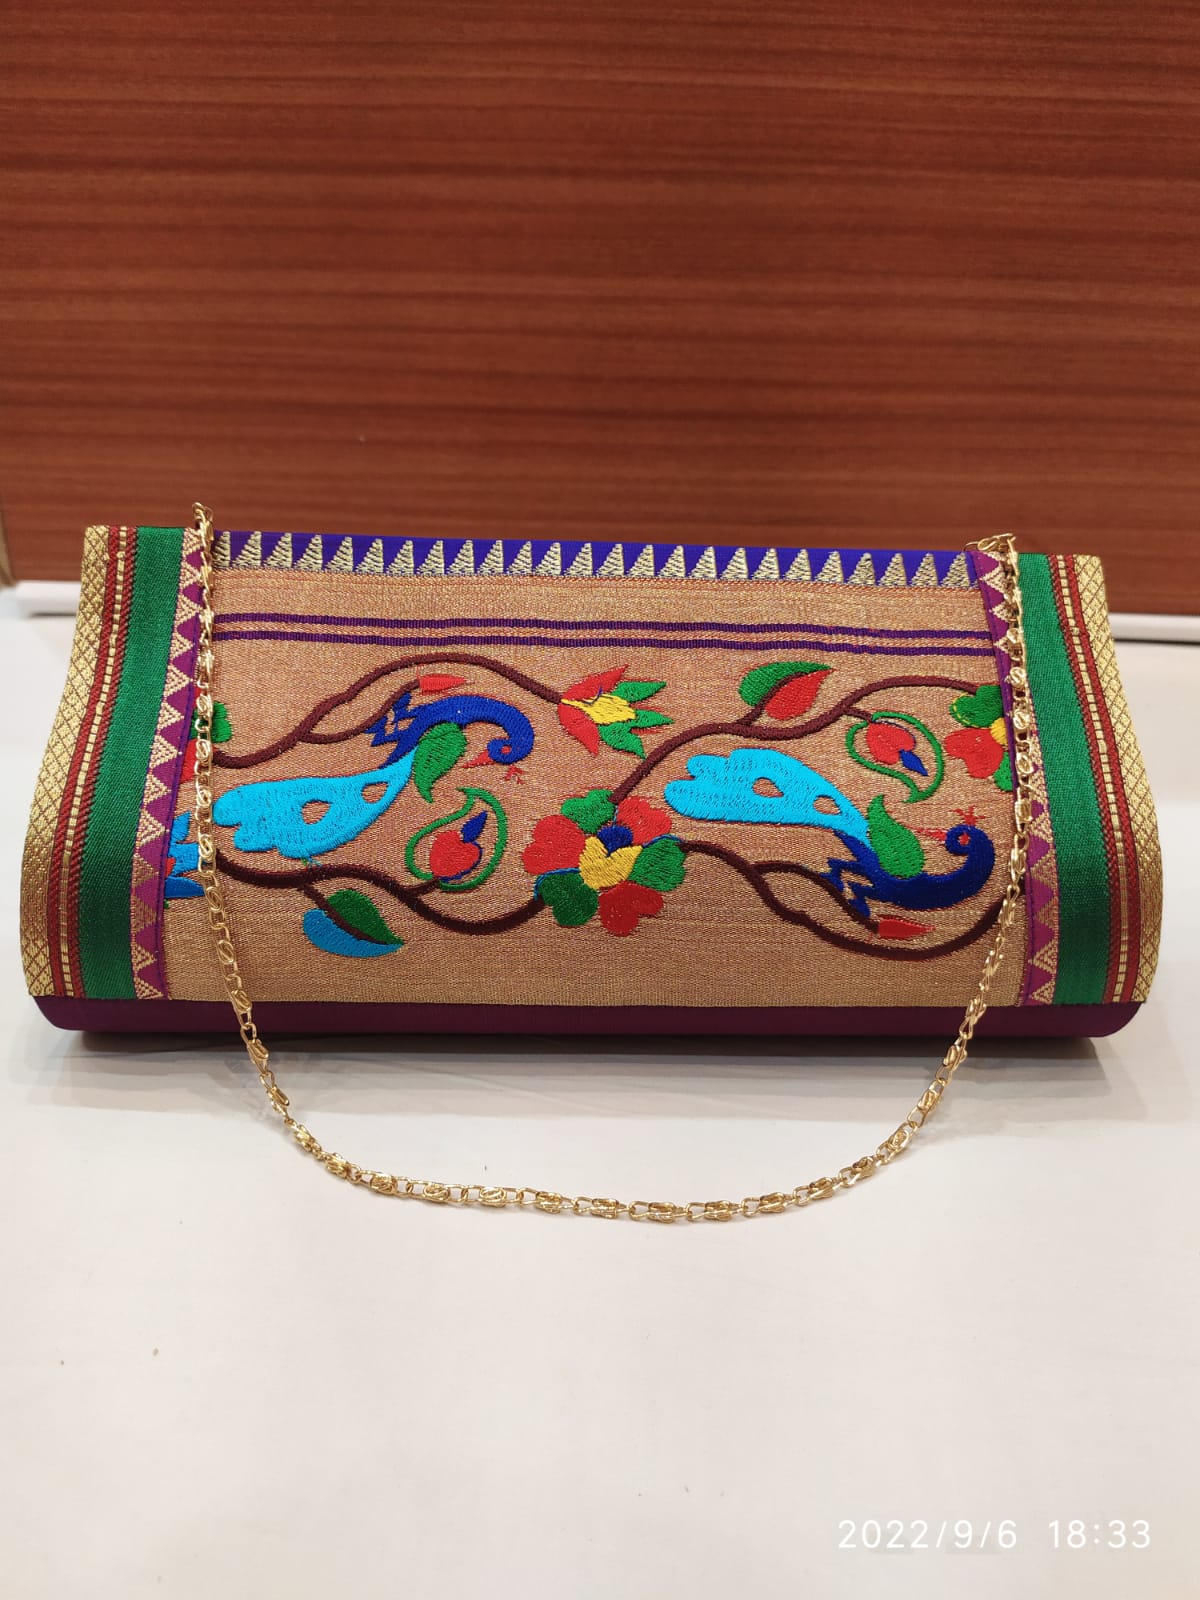 Vintage Beaded Peacock Evening Purse Bag Made In India | eBay